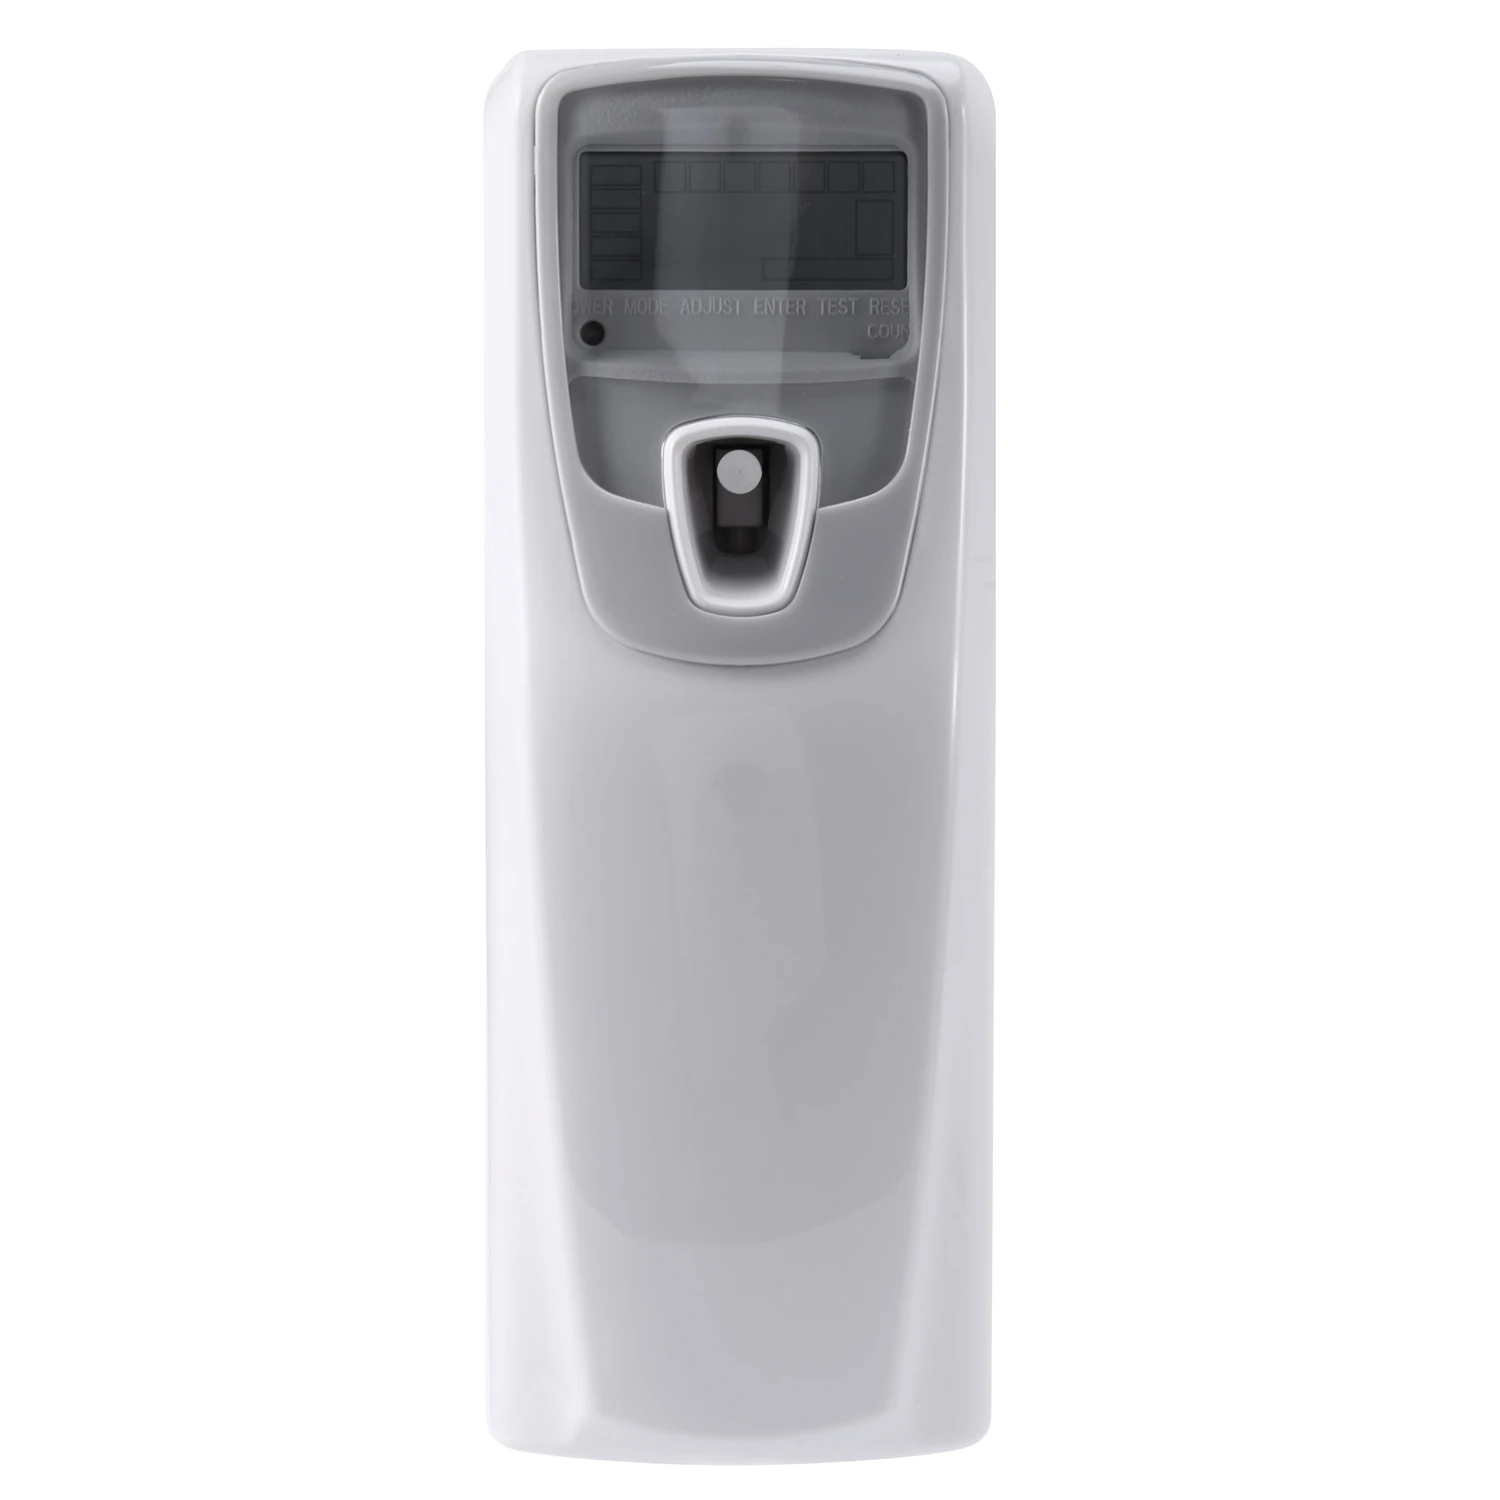 

Lcd Automatic Aerosol Dispenser Auto Toilet Air Freshener for Home with Empty Cans Perfume Dispenser